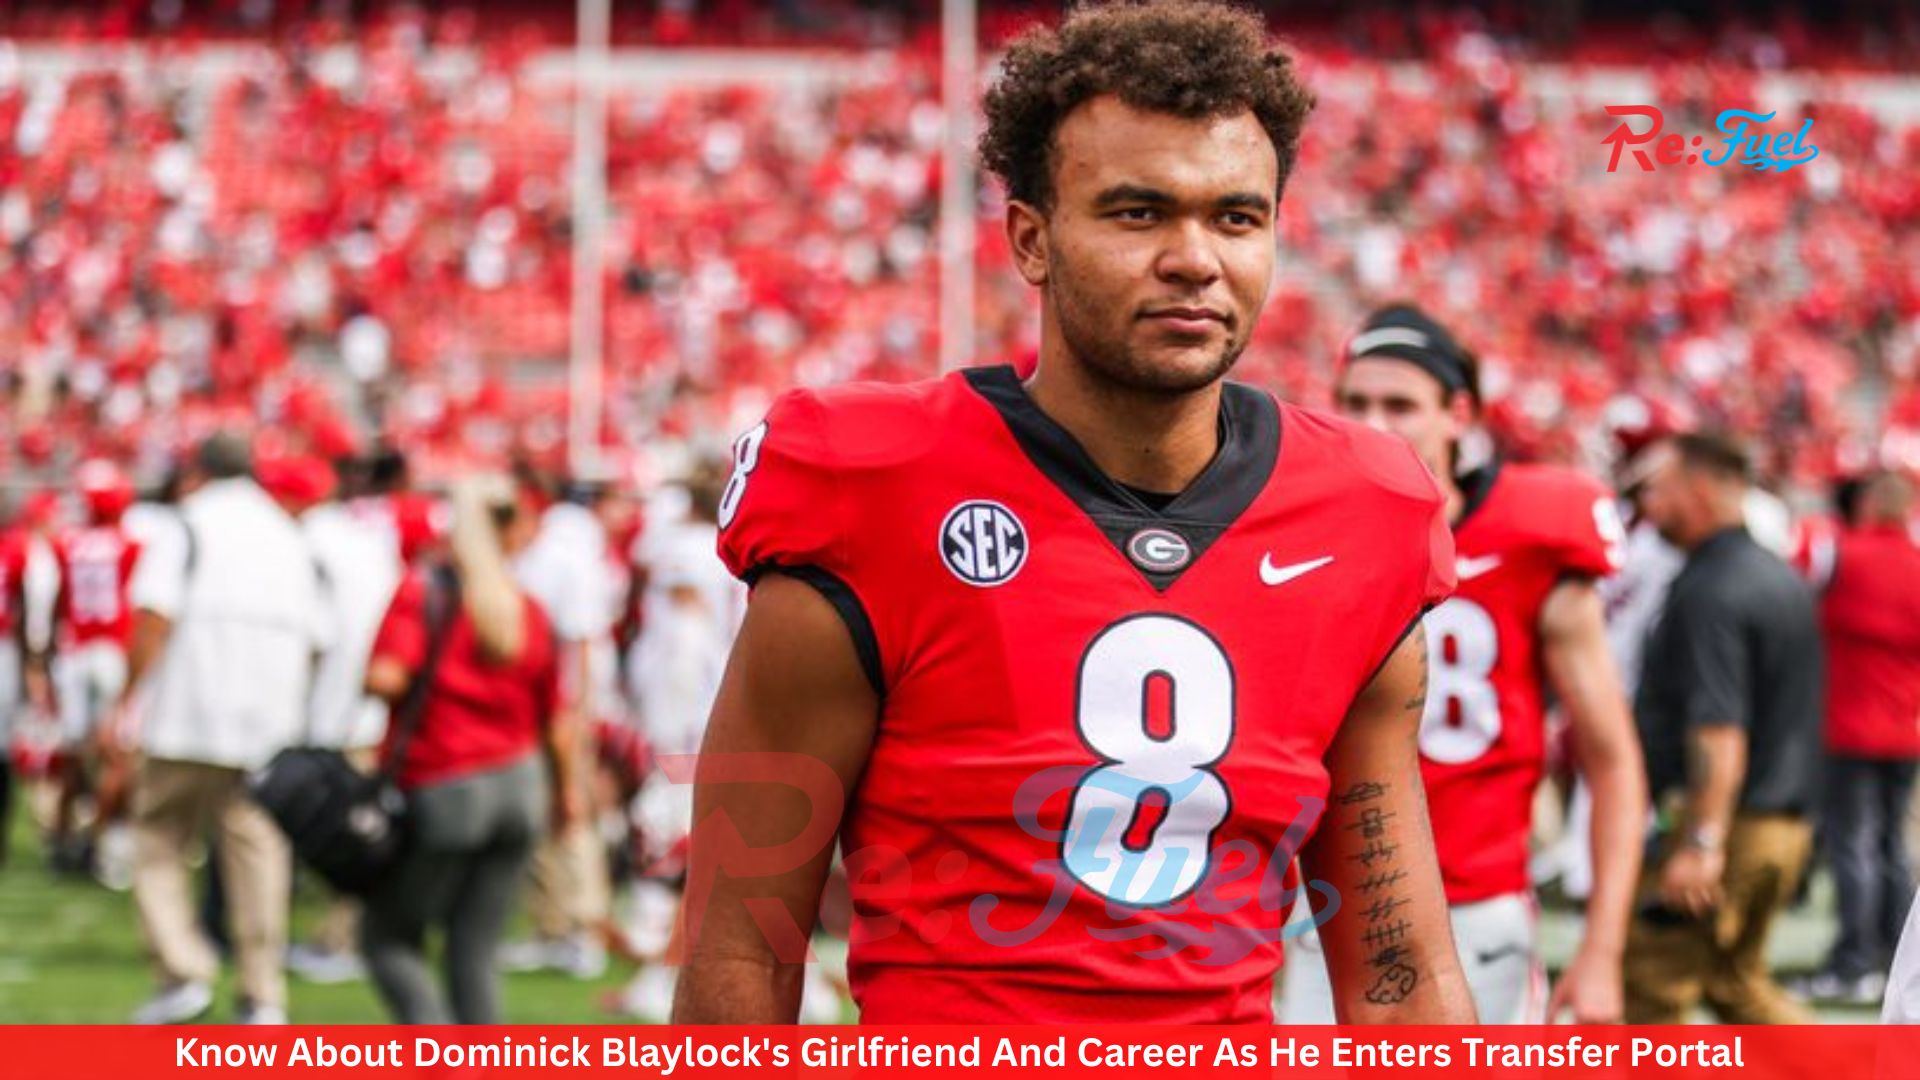 Know About Dominick Blaylock's Girlfriend And Career As He Enters Transfer Portal